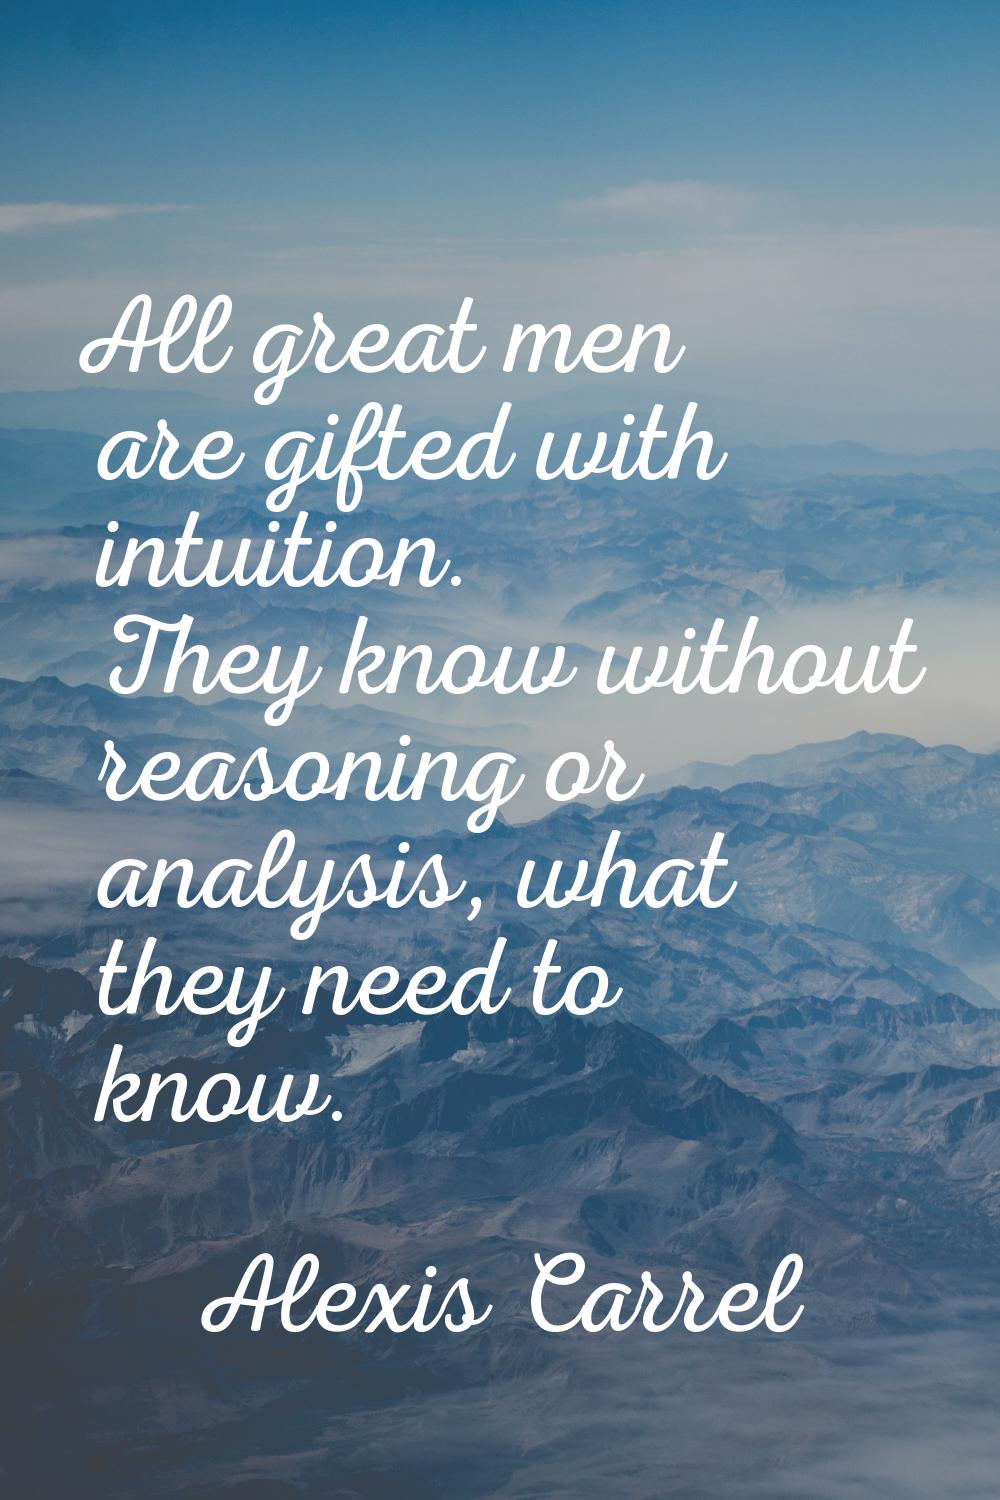 All great men are gifted with intuition. They know without reasoning or analysis, what they need to